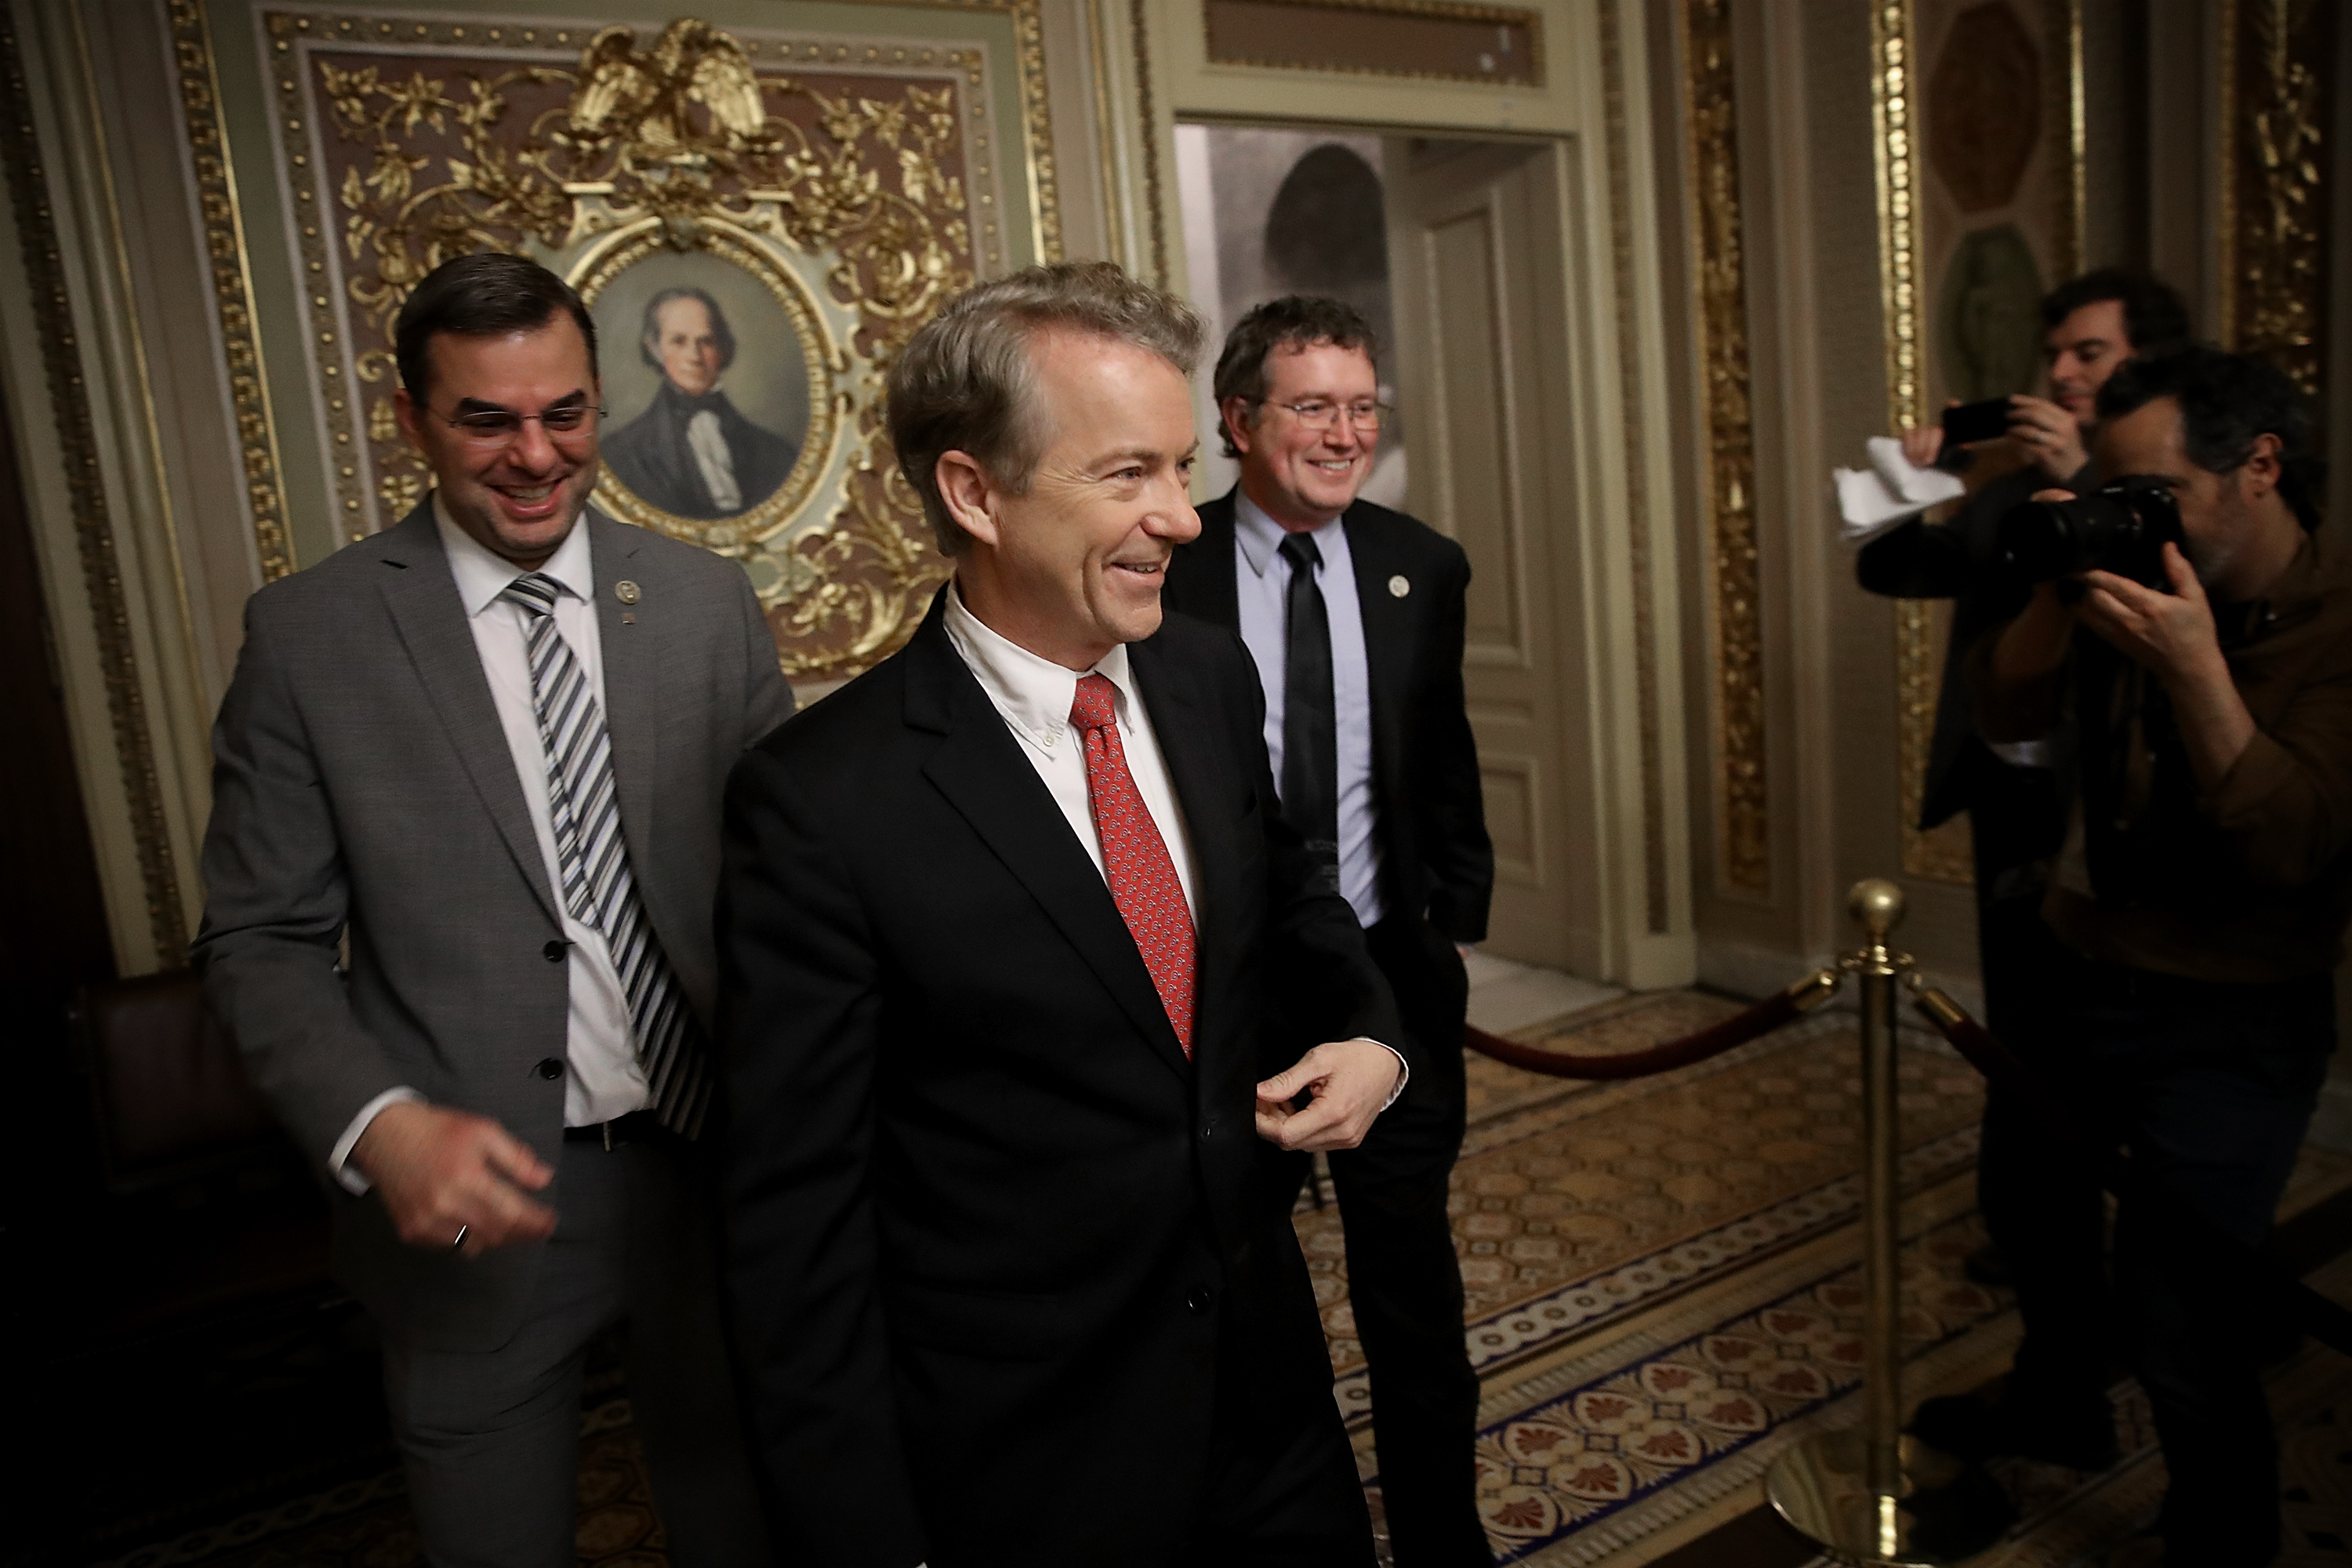 Sen. Rand Paul takes a break from the floor of the U.S. Senate with Rep. Justin Amash and Rep. Thomas Massie at the U.S. Capitol on Feb. 8, 2018. (Win McNamee—Getty Images)